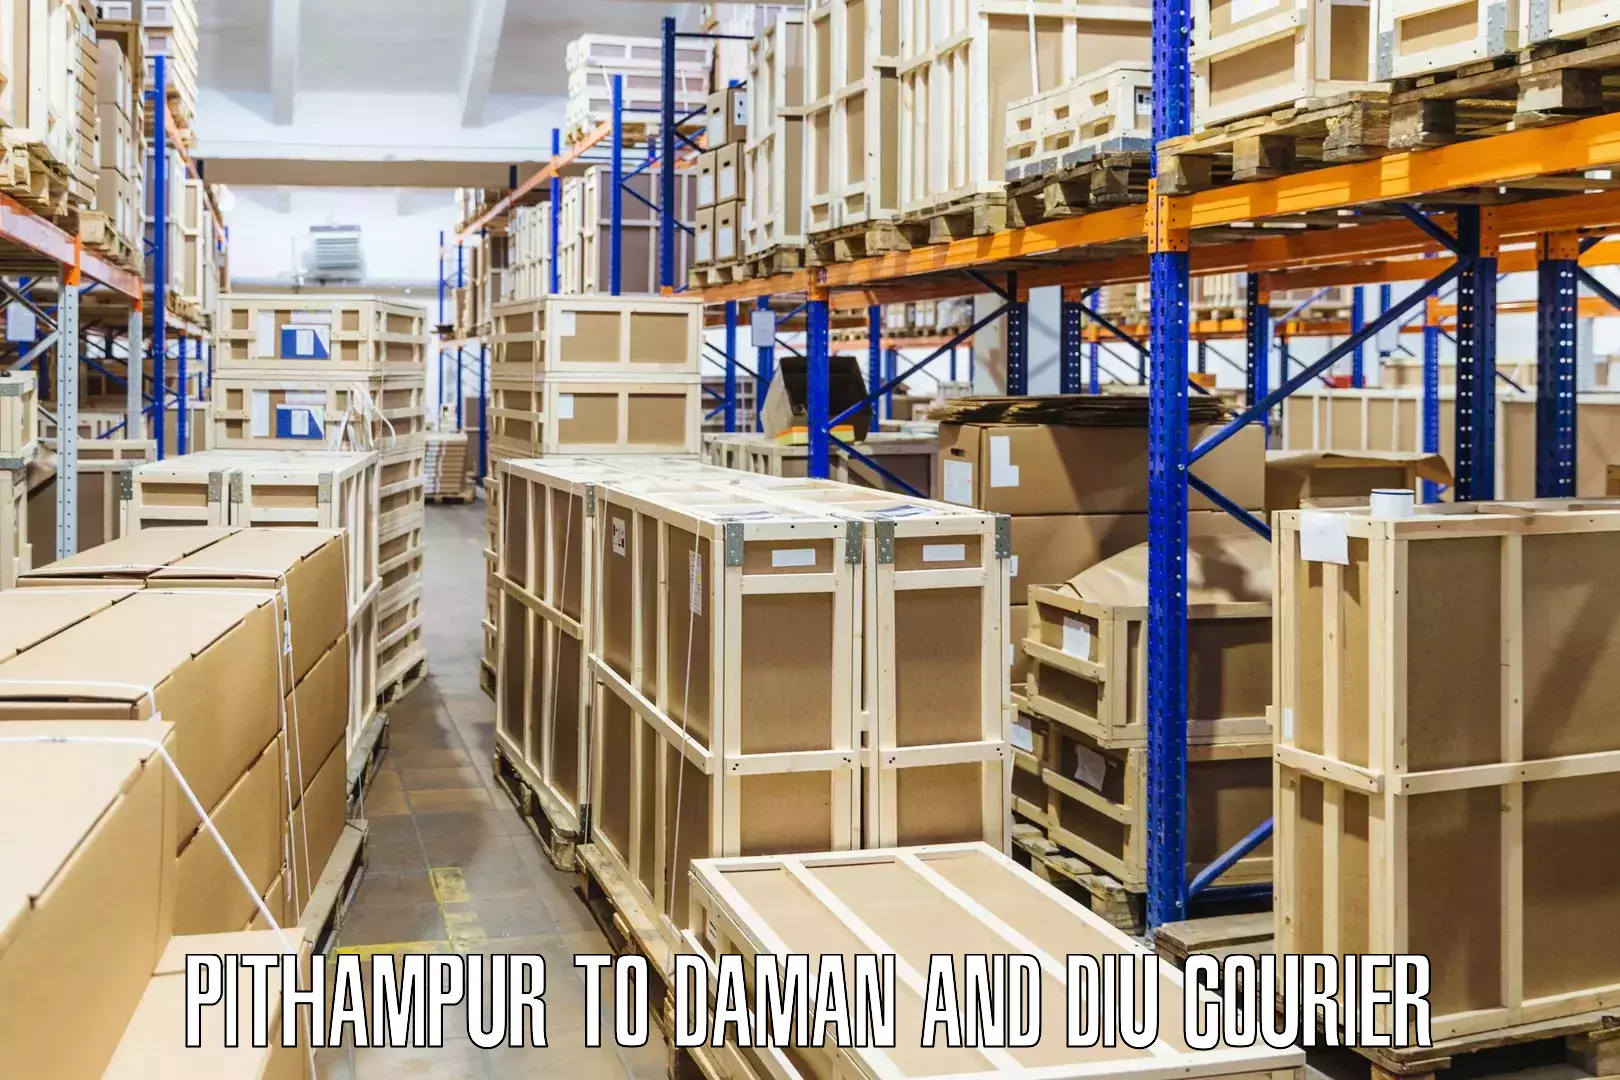 Global courier networks Pithampur to Daman